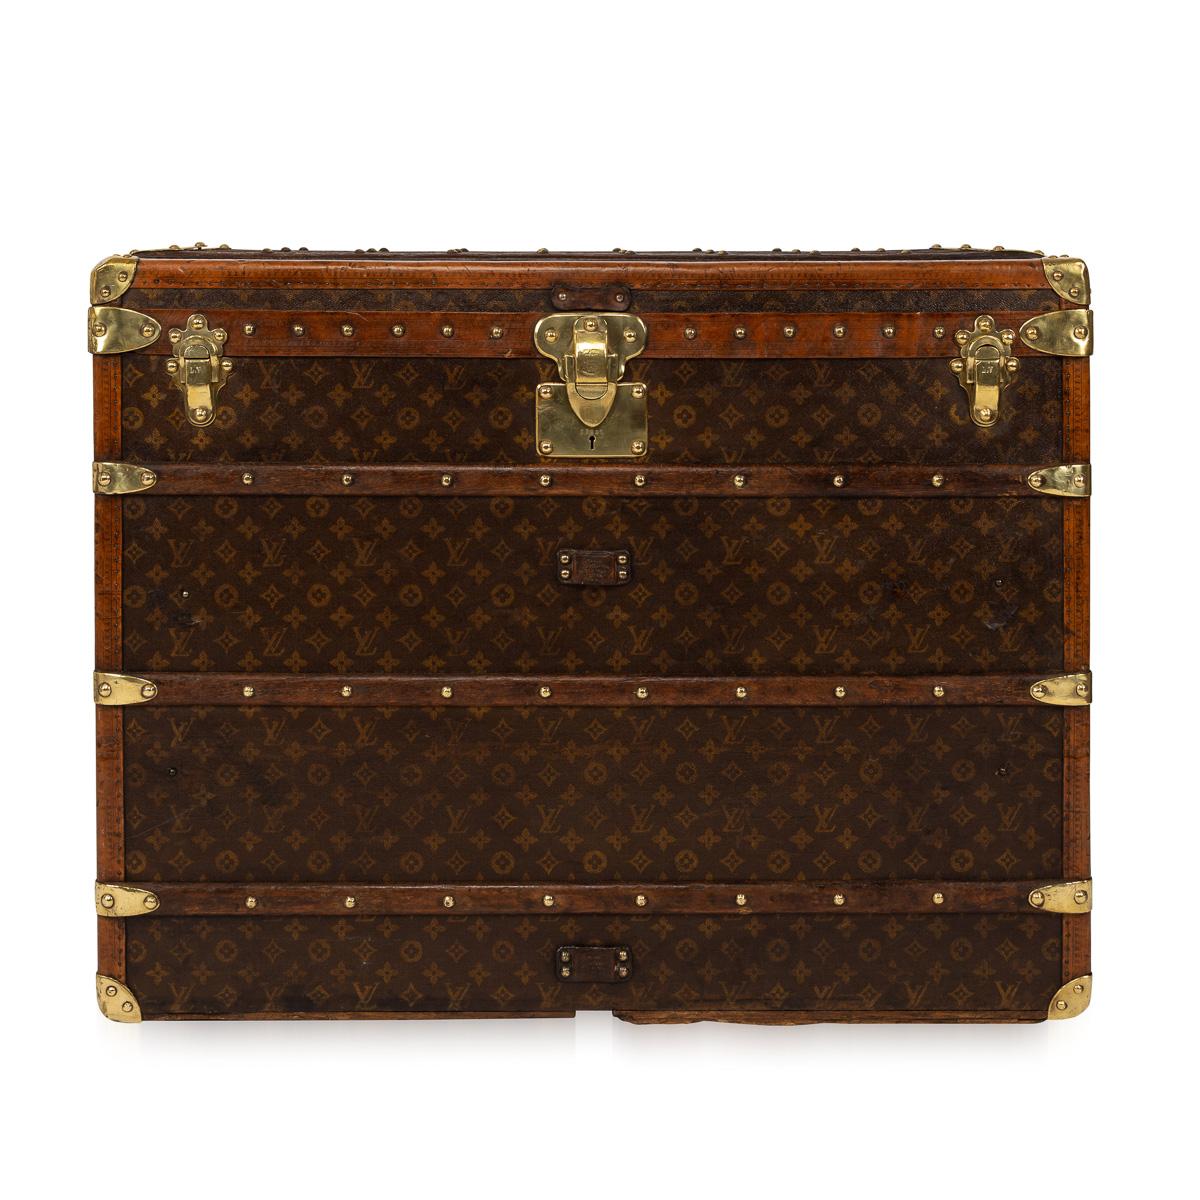 Beautiful and most importantly complete, this early 20th century Louis Vuitton trunk was the must have item of any elite traveller. Covered in the world famous LV monogrammed canvas, with its lozine borders and brass fitting it would have been the